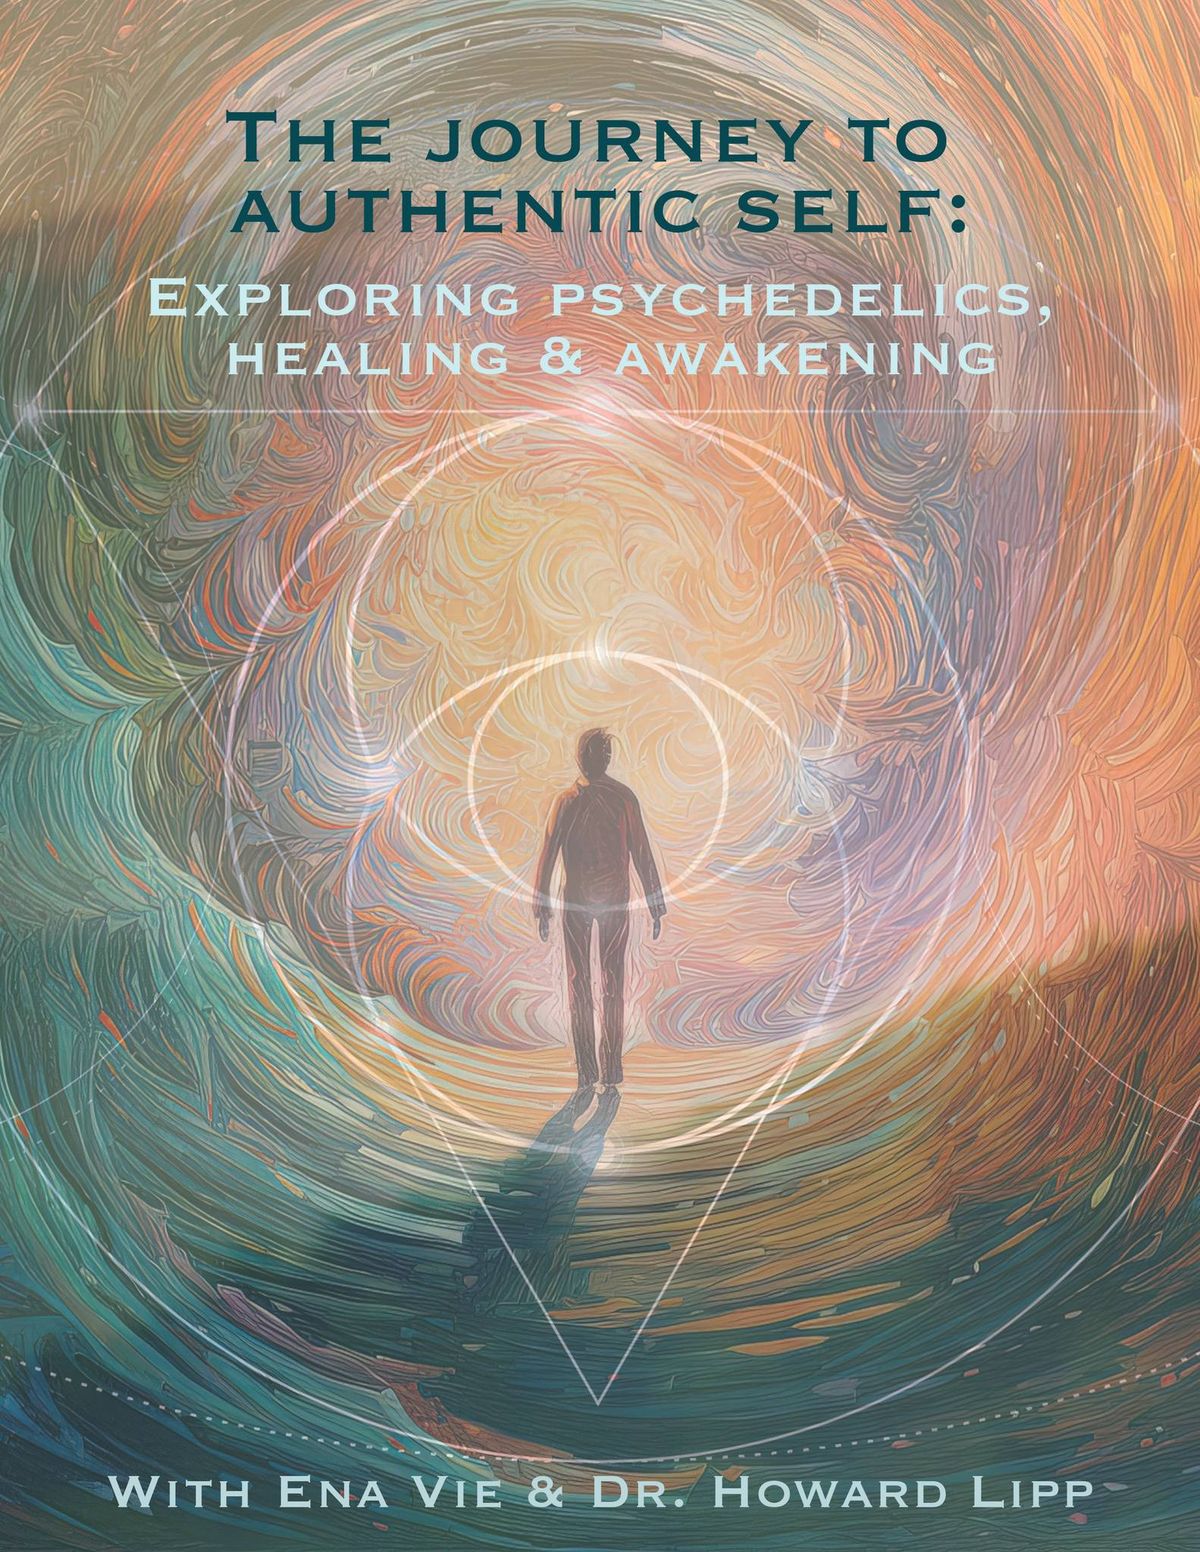 Journey to Authentic-Self Exploring Psychedelics, Healing, and Awakening